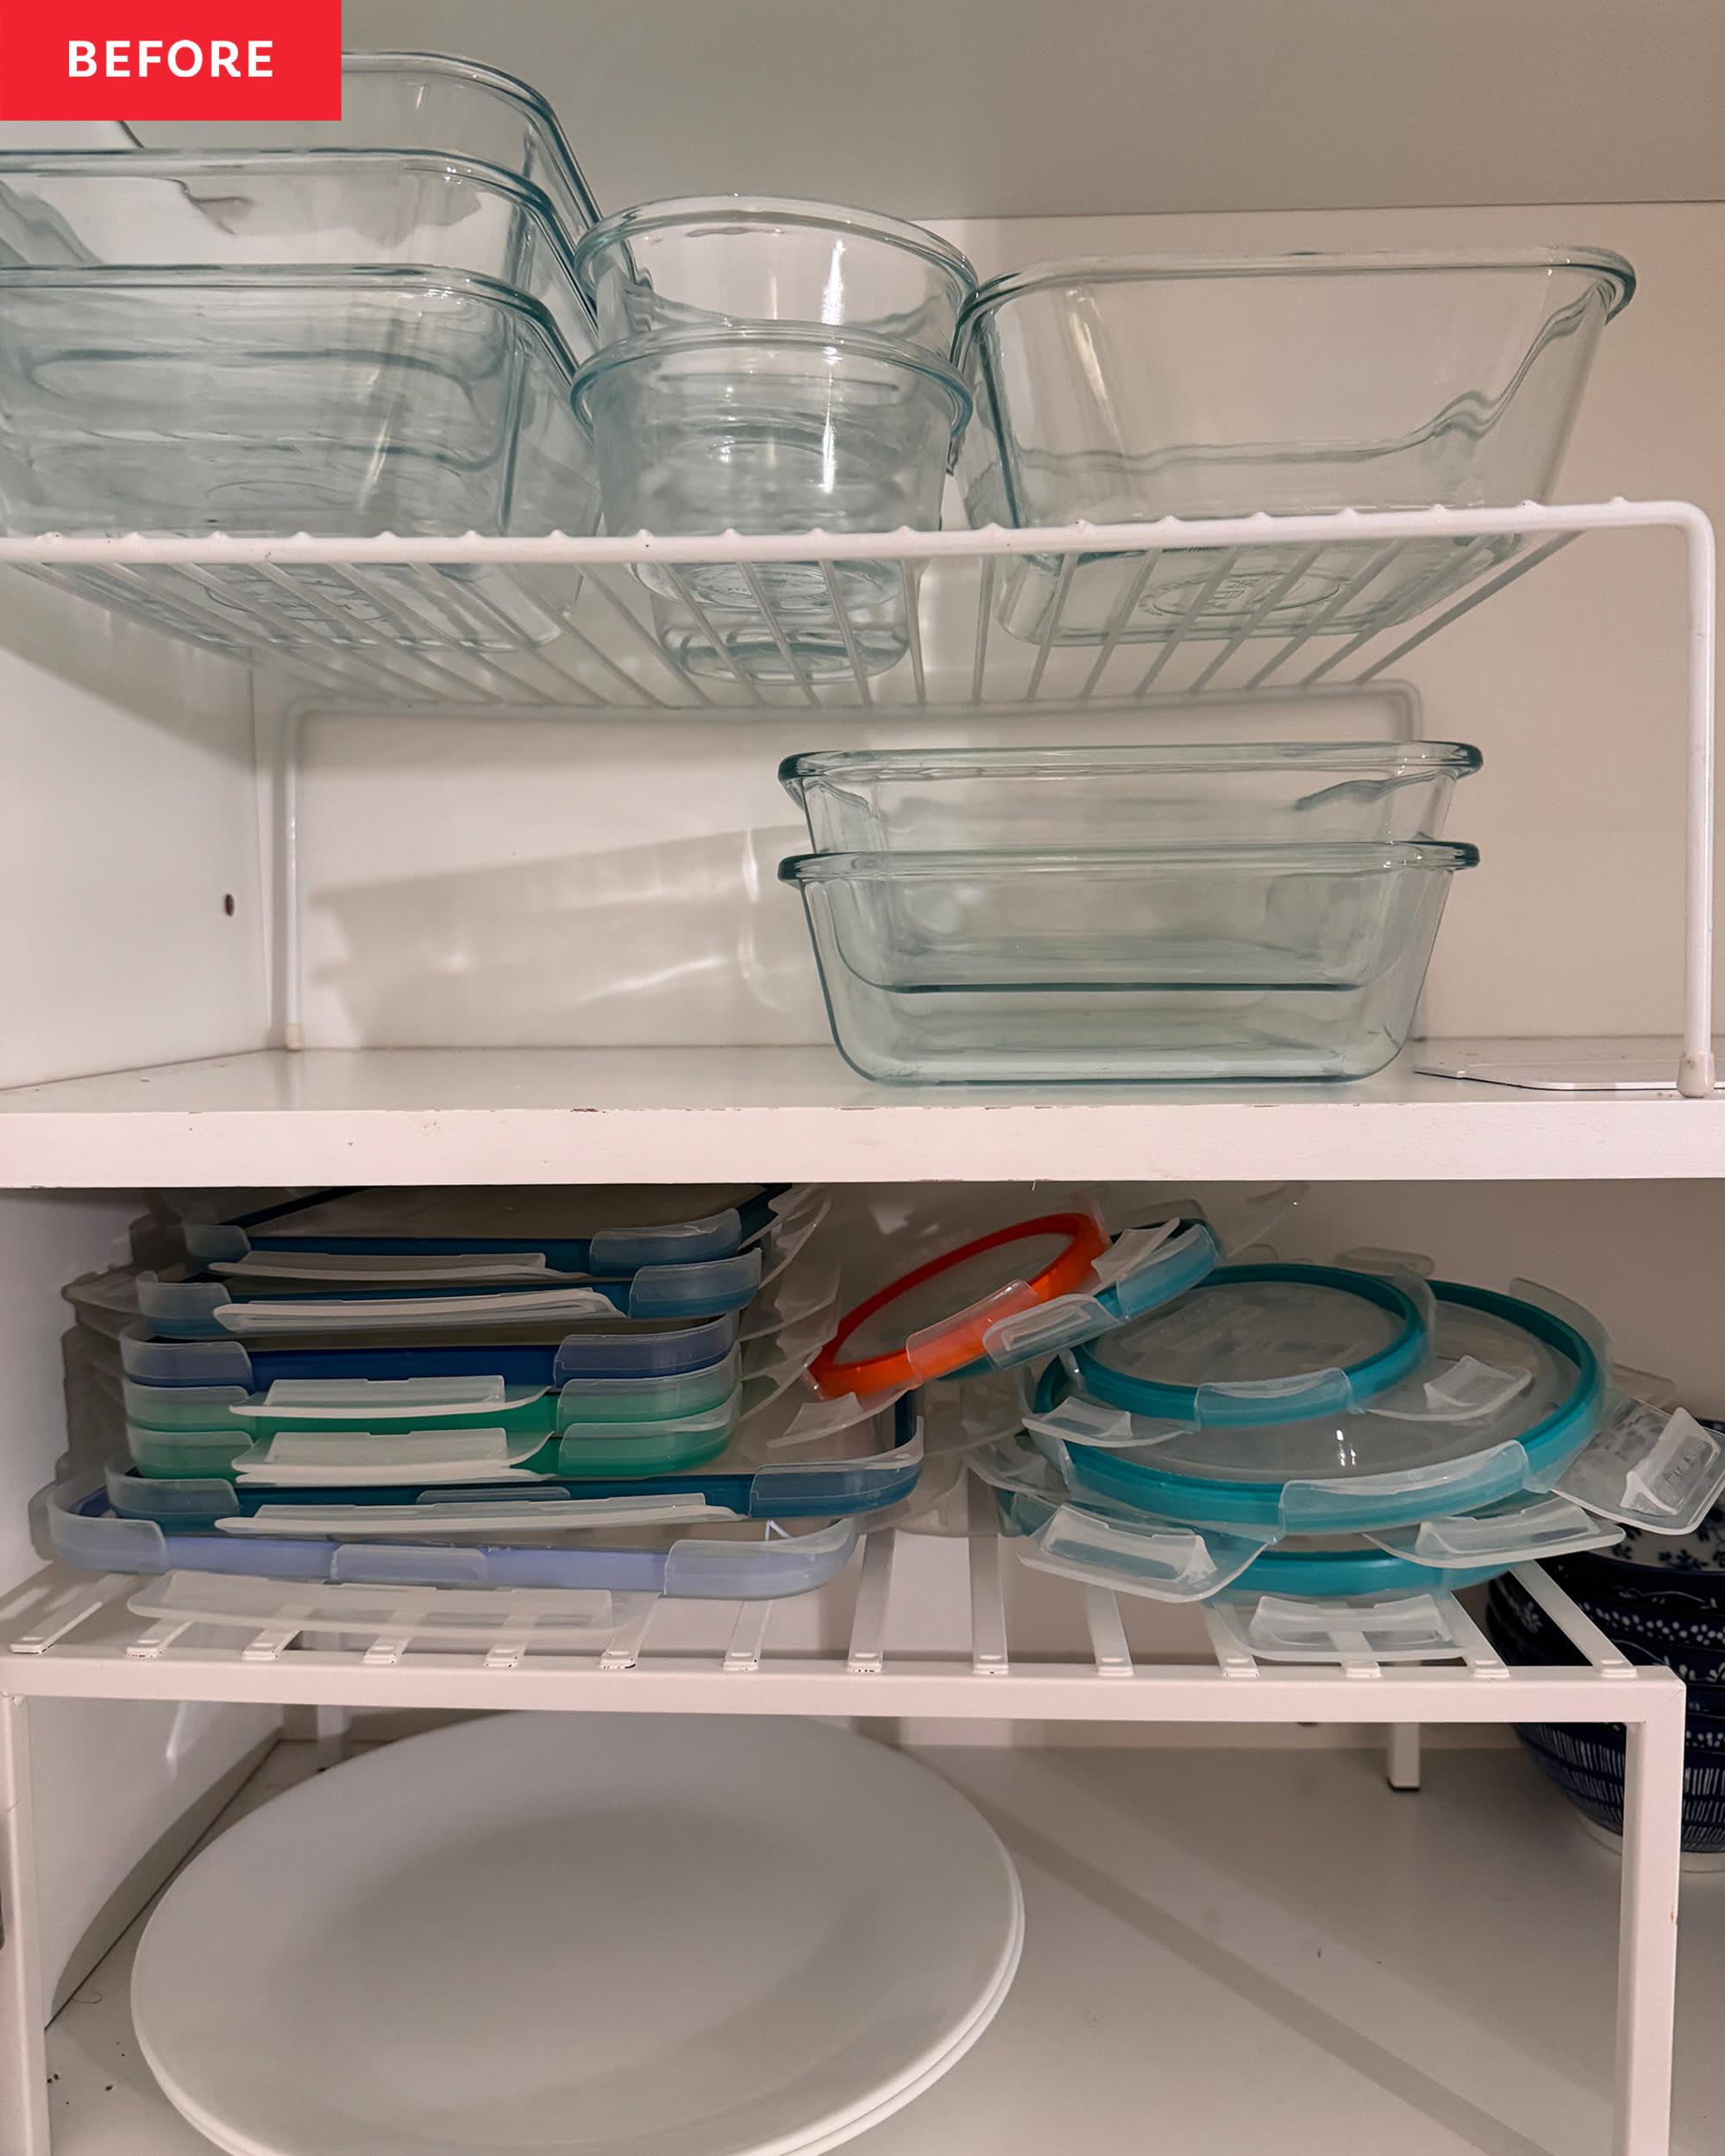 https://cdn.apartmenttherapy.info/image/upload/v1703178633/k/2023-12-youcopia-storalid-food-container-lid-organizer/vyoucopia-storalid-lid-organizer-review-before-2783.jpg